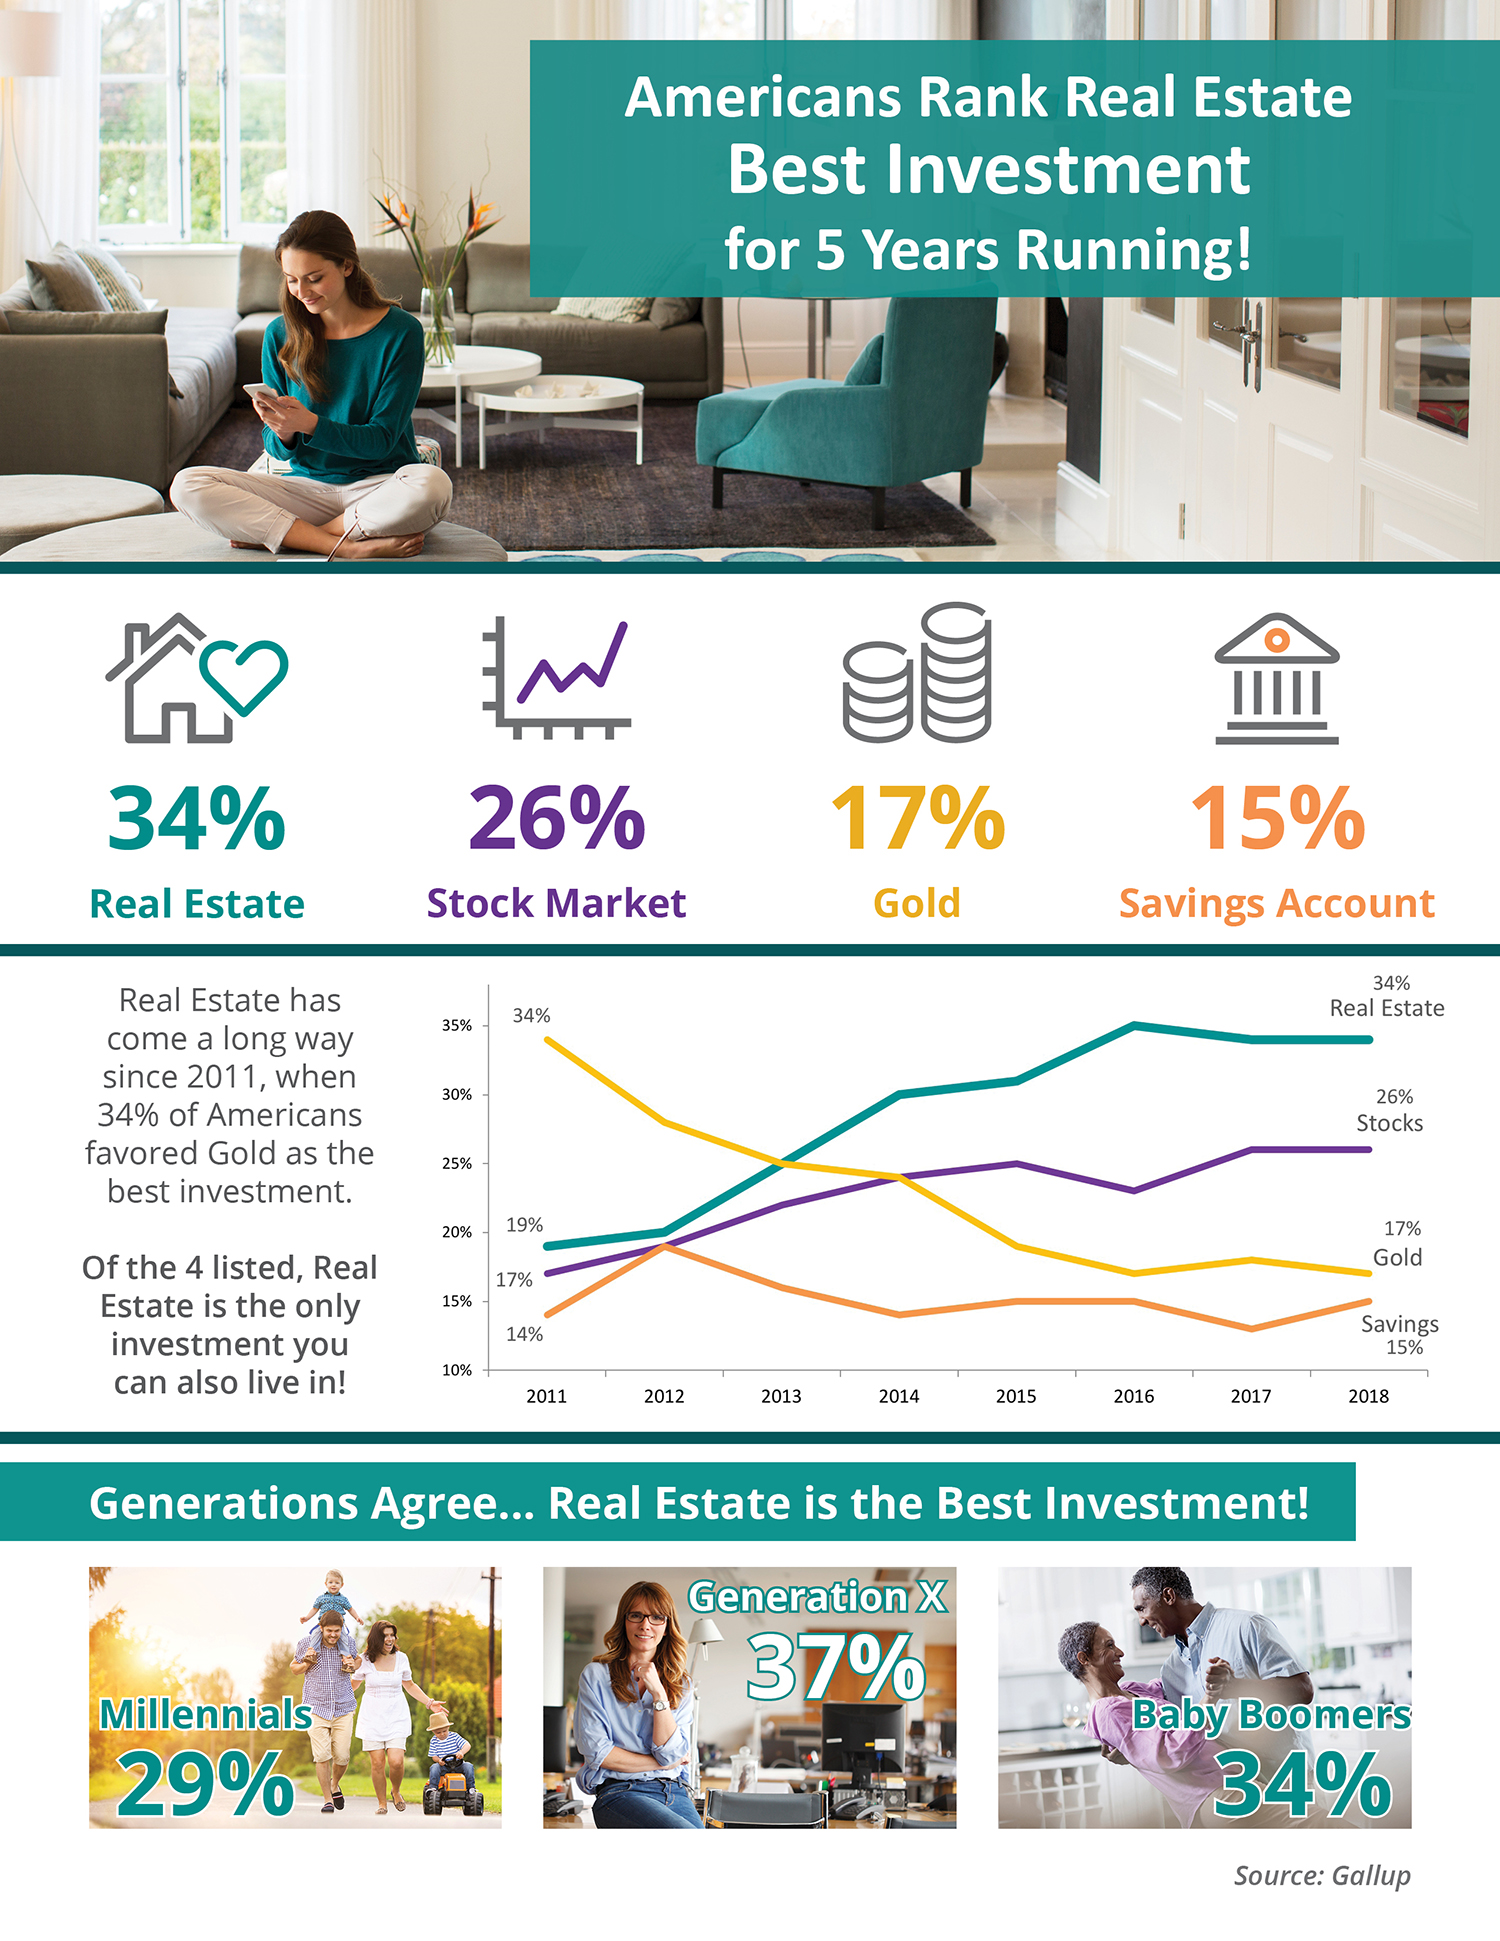 Americans Rank Real Estate Best Investment for 5 Years Running! [INFOGRAPHIC]